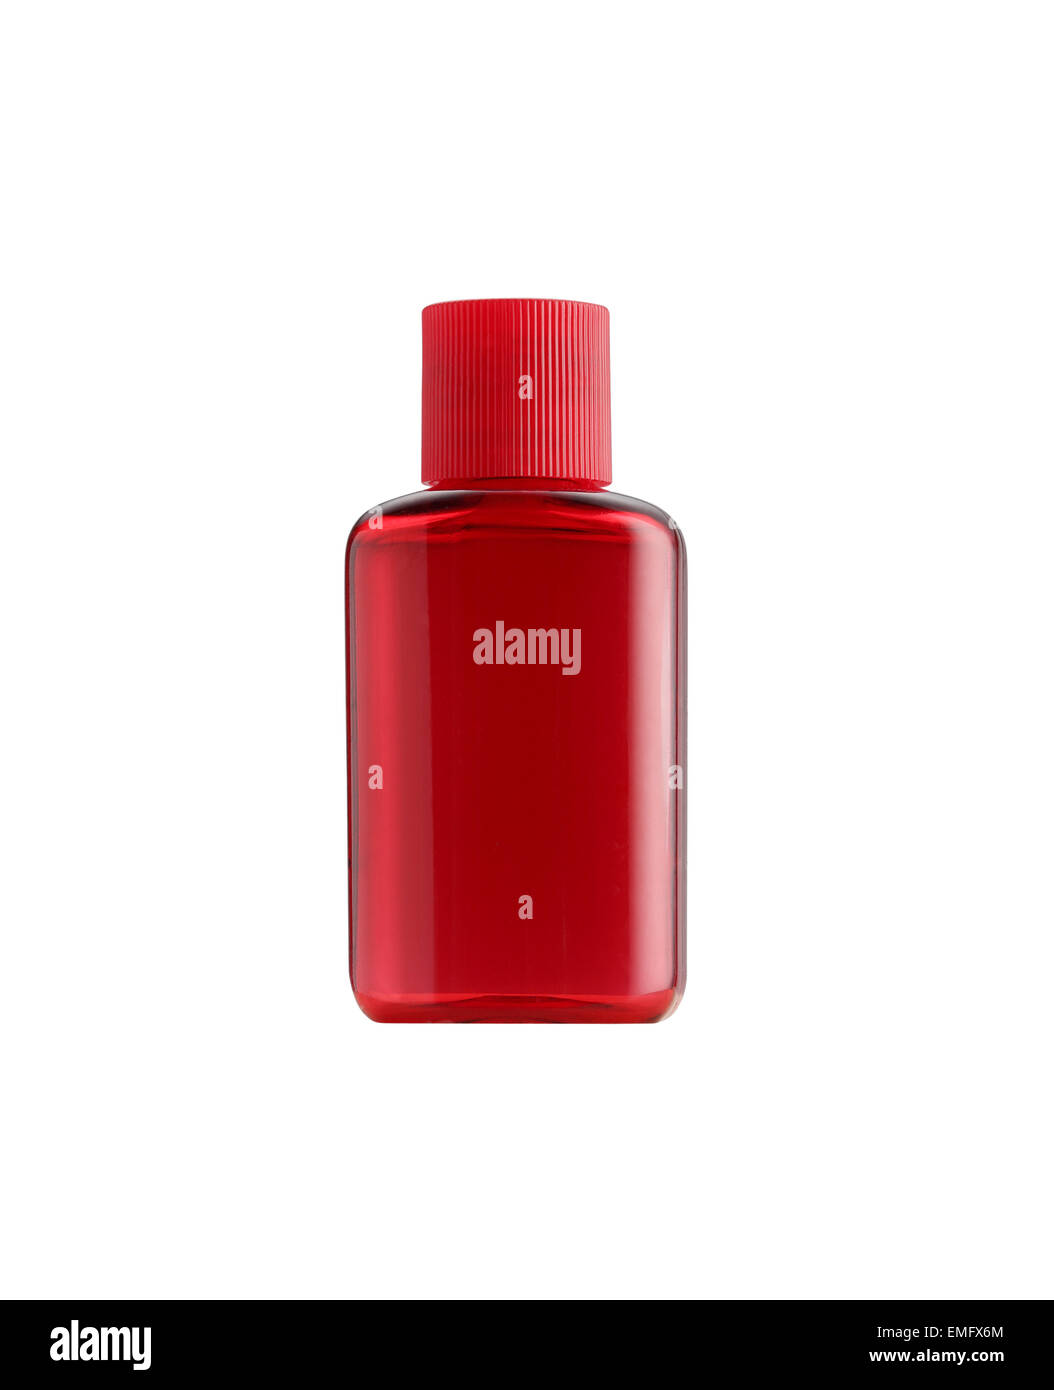 The small bottle red color packaging isolated Stock Photo